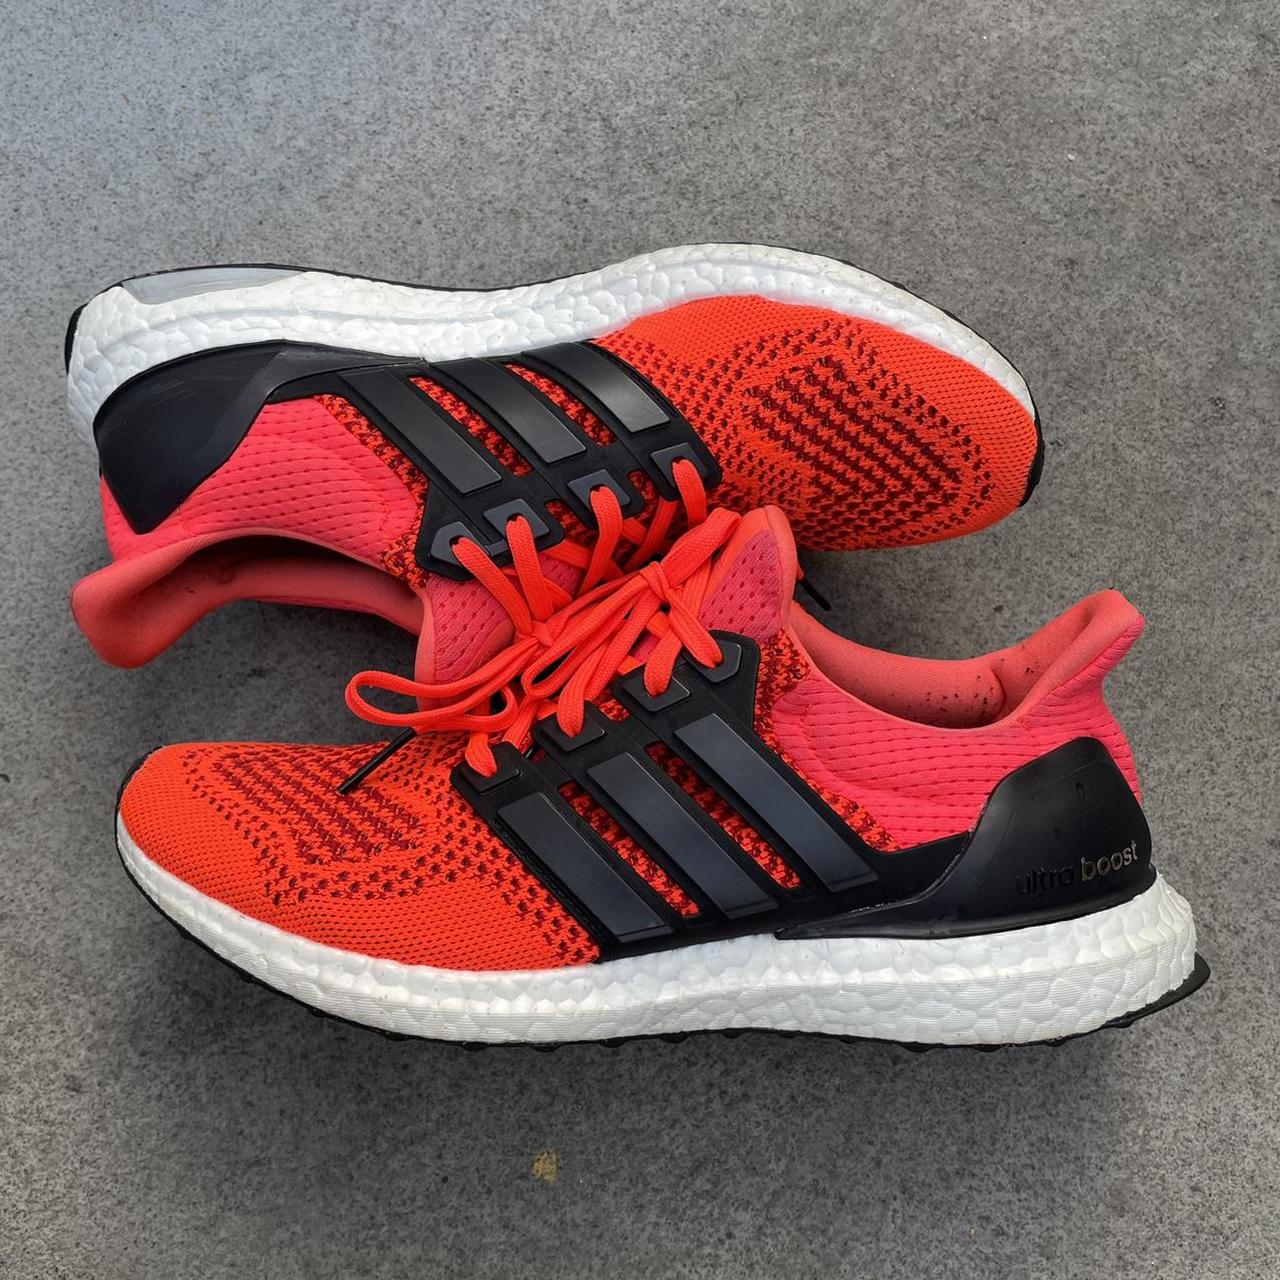 Passief riem aanklager Adidas Ultraboost 1.0 “Solar Red” size 8 Gently... - Depop